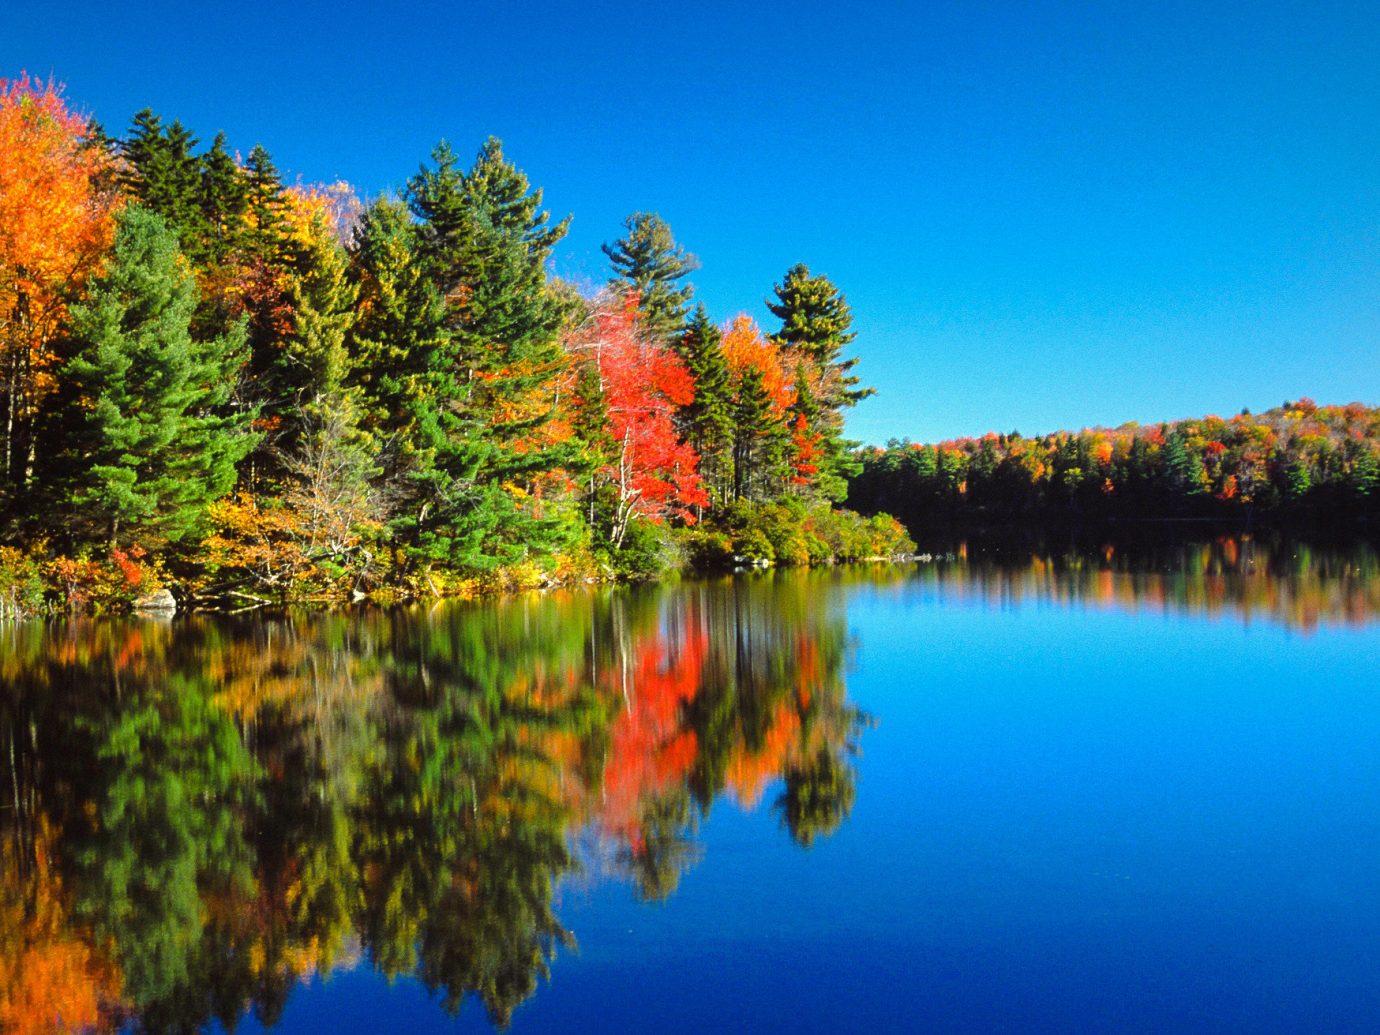 Trip Ideas water tree sky reflection Nature leaf Lake outdoor wilderness autumn River pond reservoir biome mount scenery landscape bank larch temperate broadleaf and mixed forest evening computer wallpaper calm Forest wetland surrounded